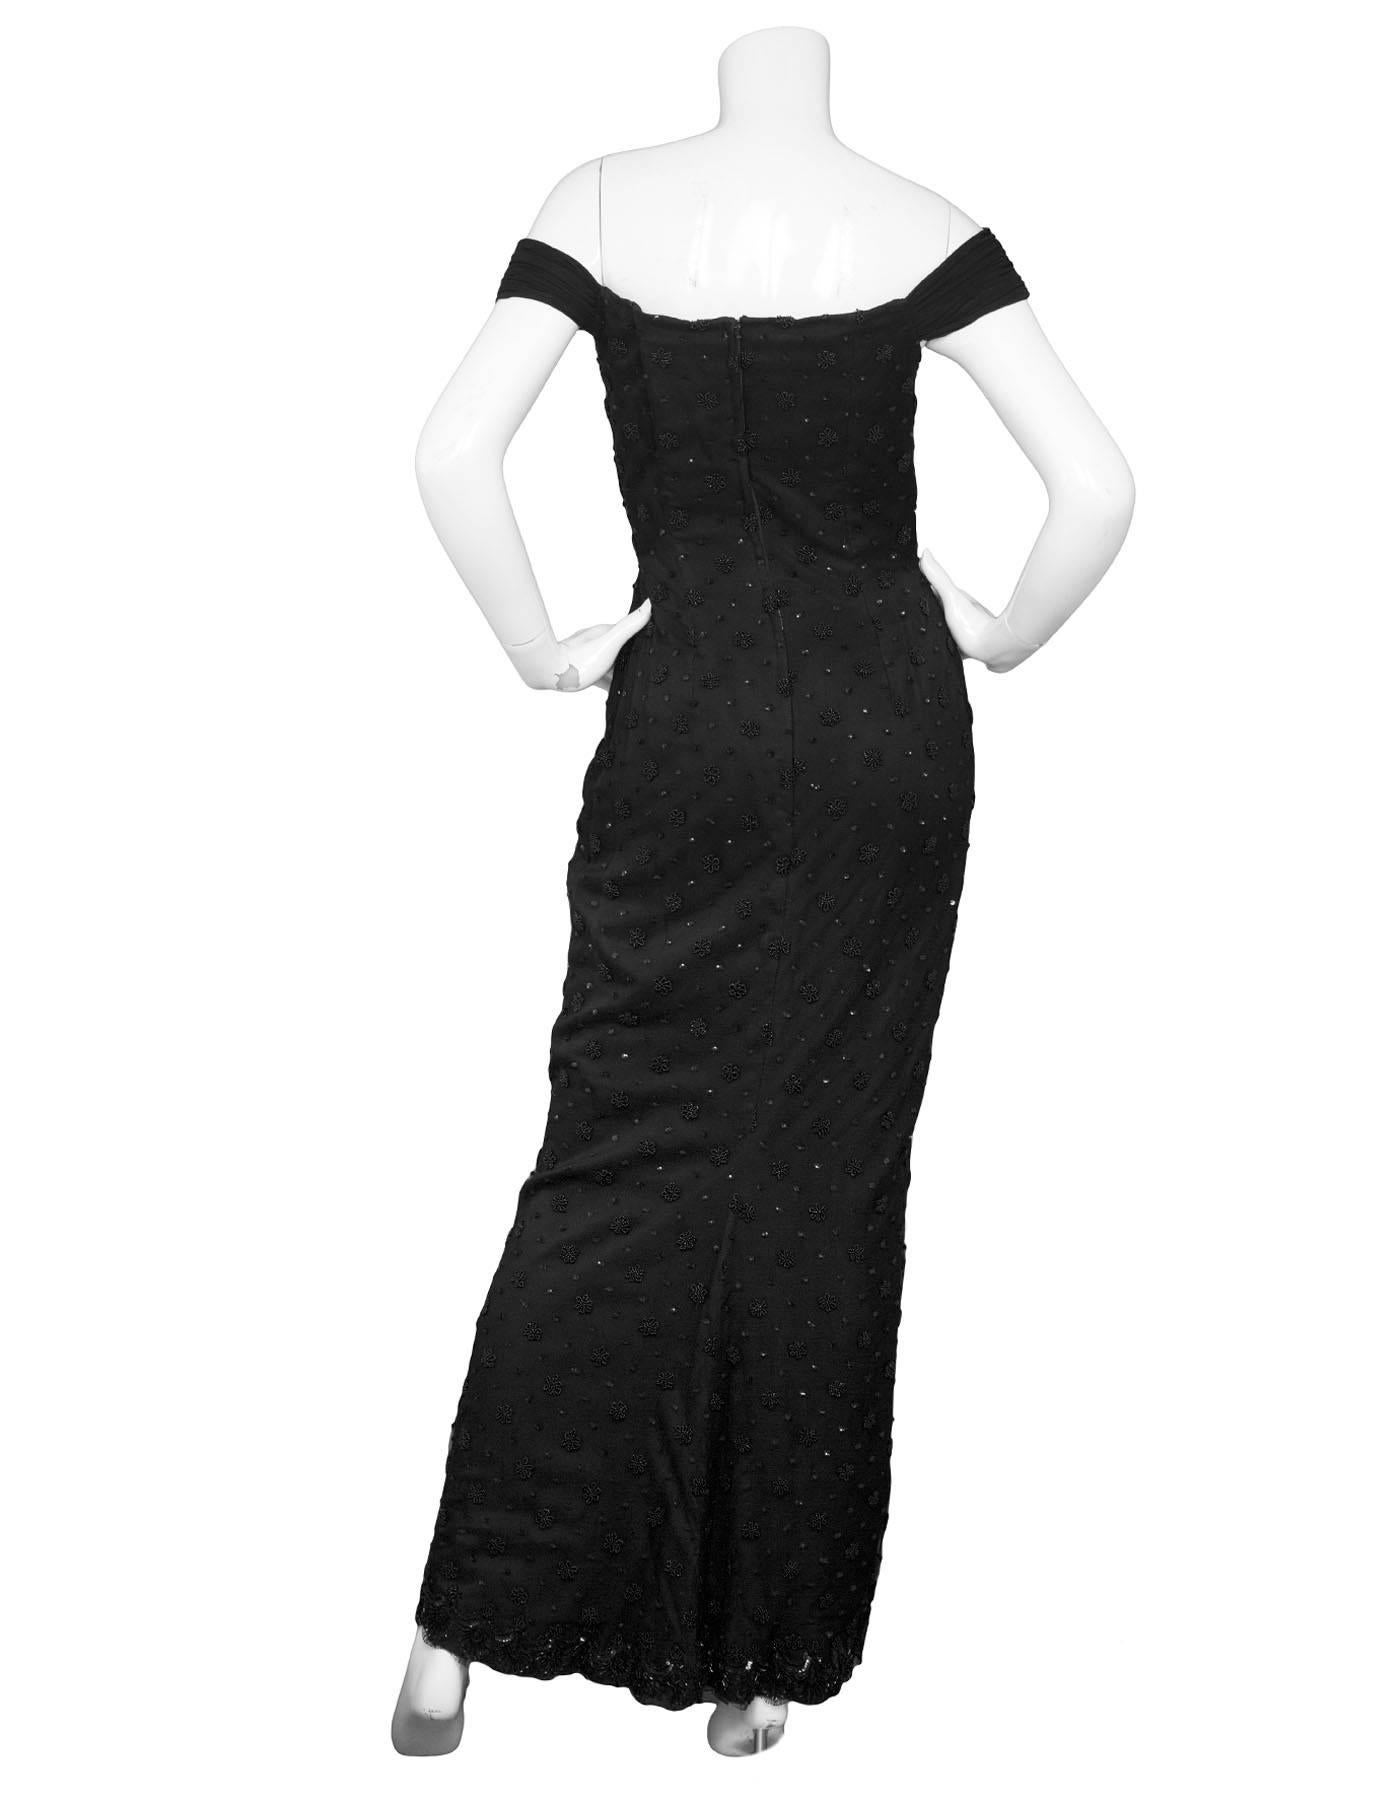 Vicky Tiel Black Beaded Gown Sz 6 rt. $6, 000 In Excellent Condition In New York, NY